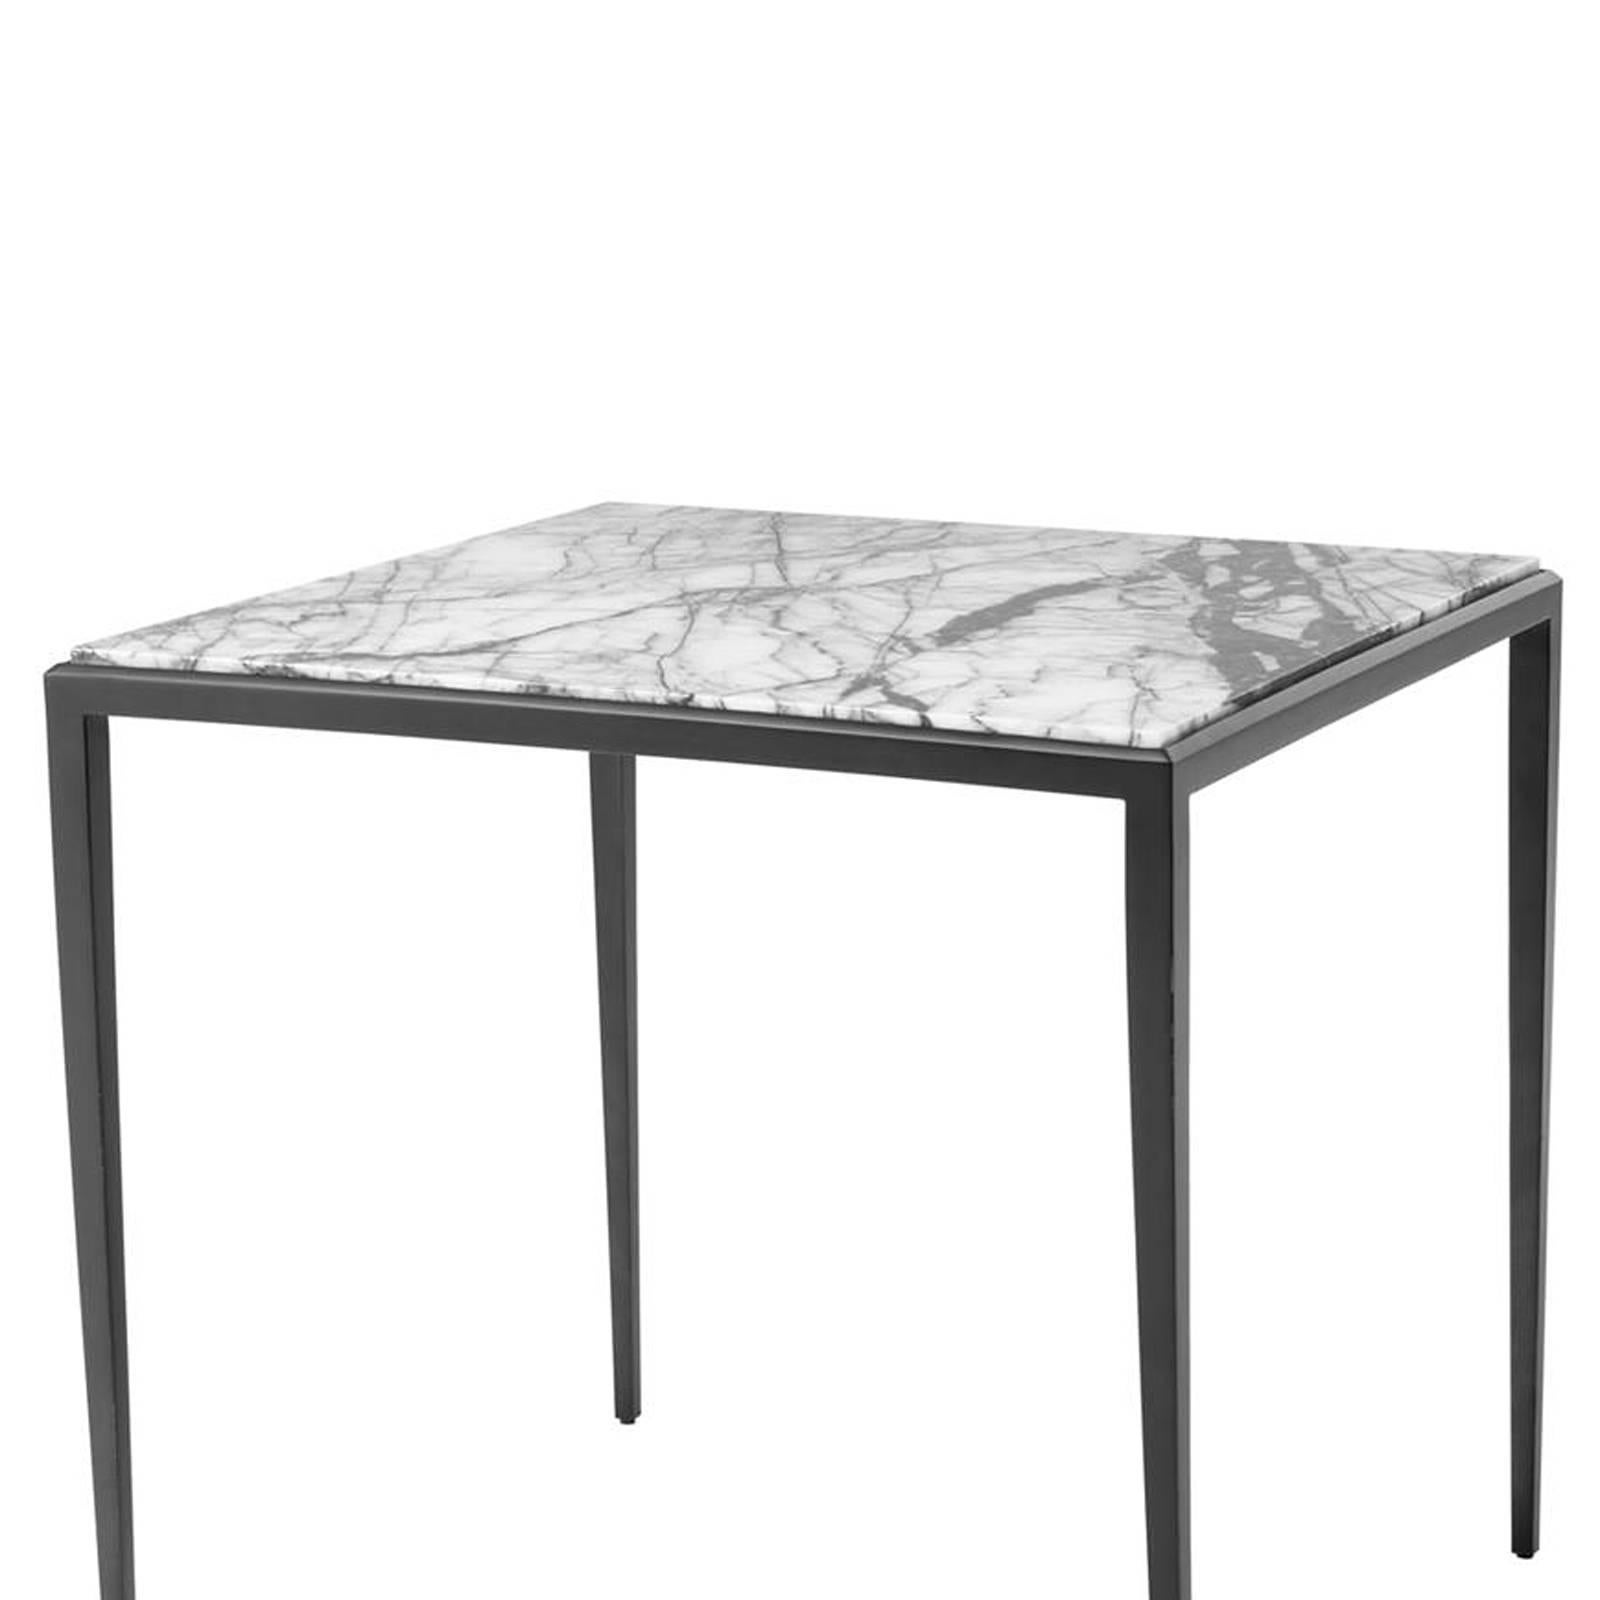 Side Table Leggy Square with structure in solid 
bronze finish. With white Lilac marble top.
Also available with brown marble top.
Also available in Coffee Table Leggy or
Console Table Leggy with white Lilac or brown 
marble top.
